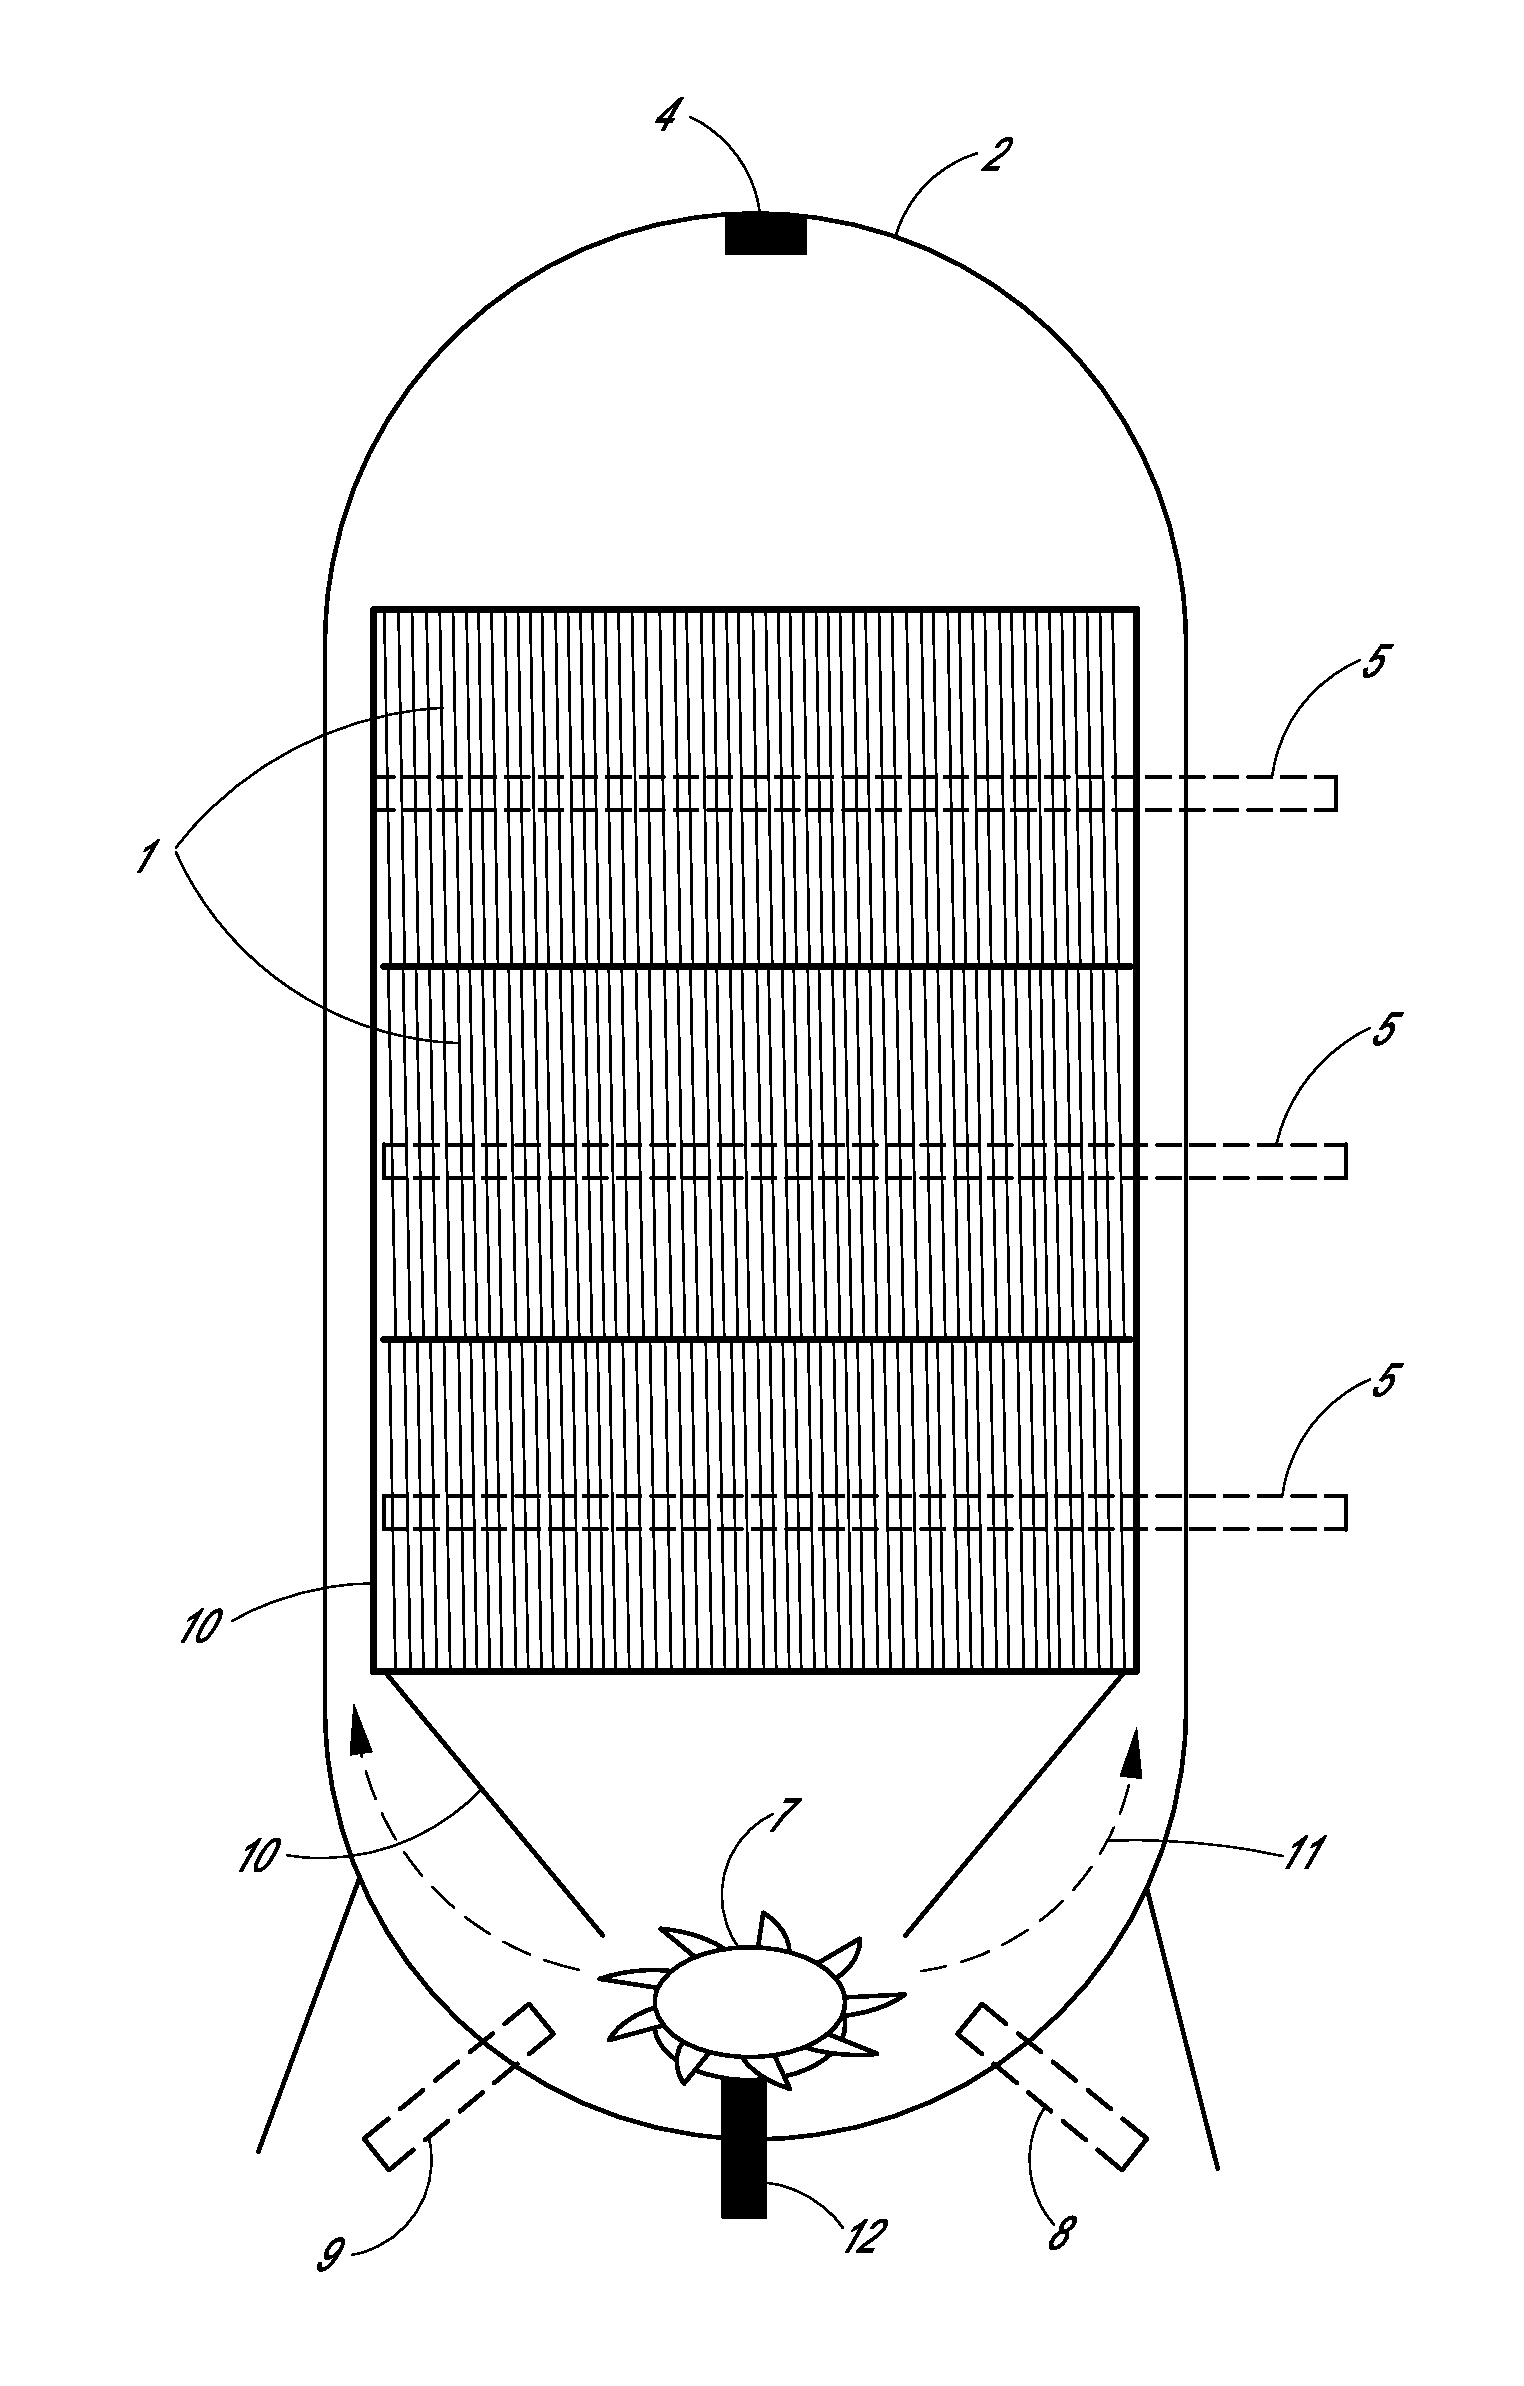 Water treatment systems and methods